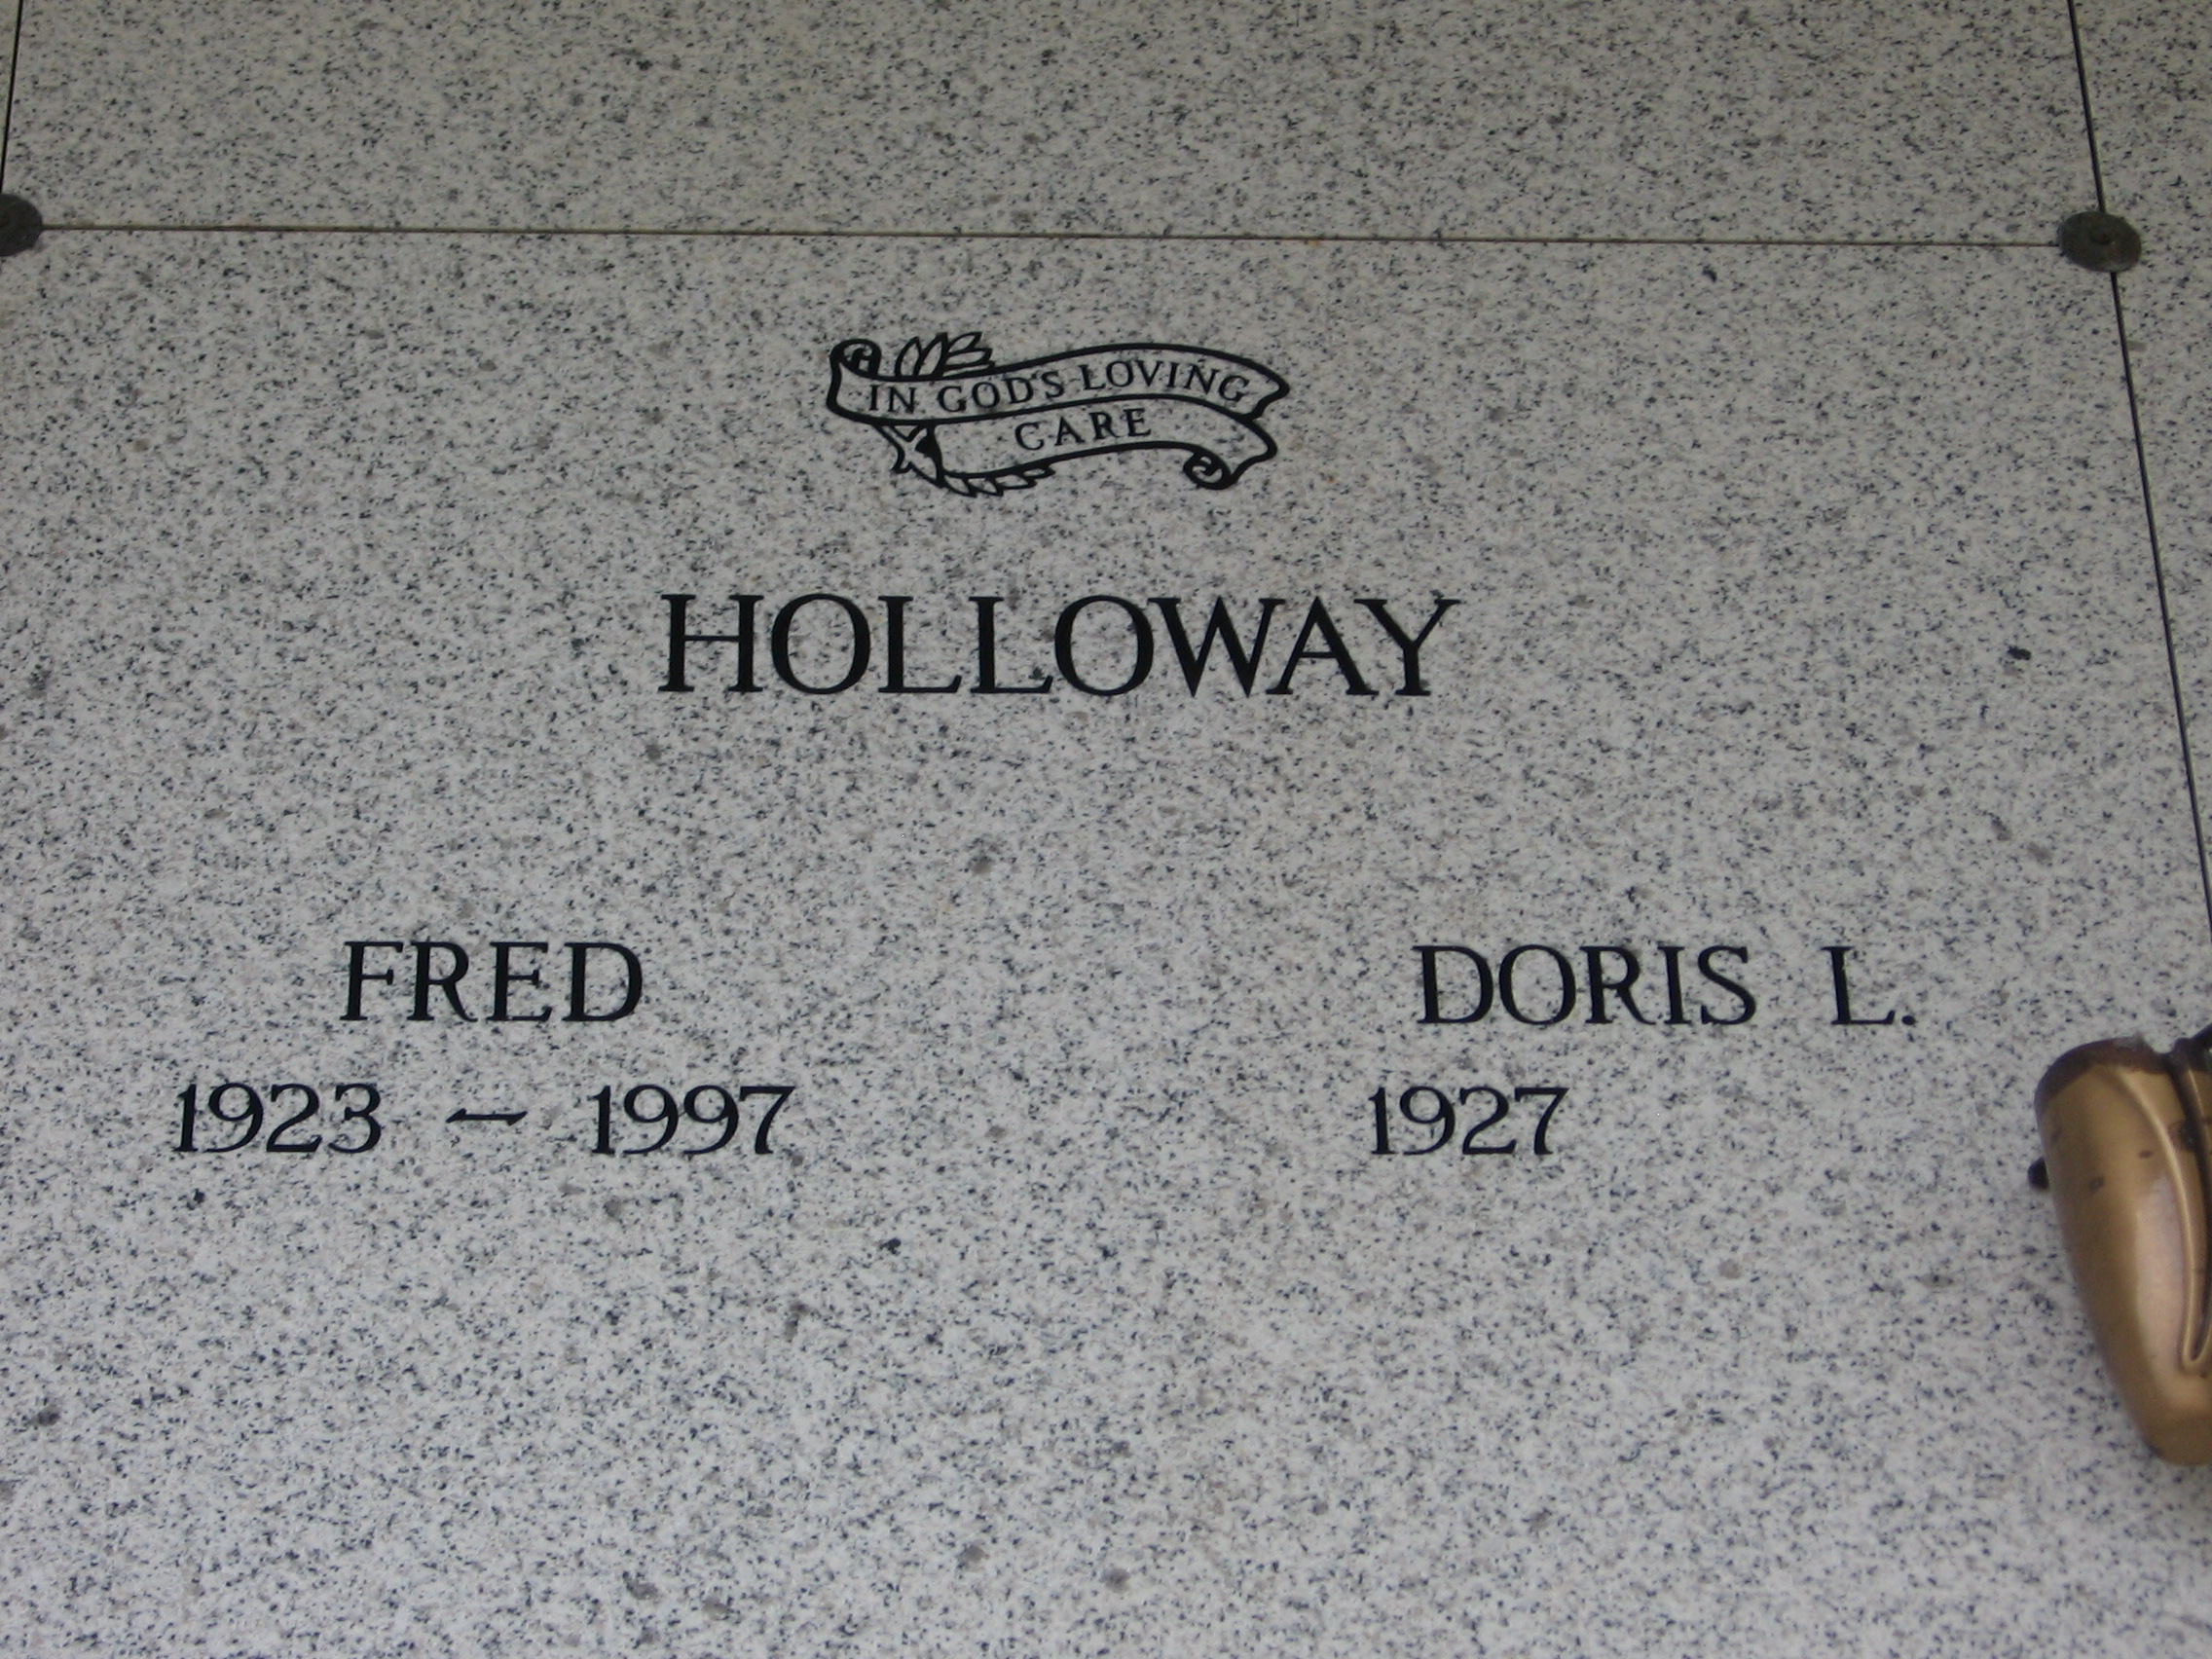 Fred Holloway